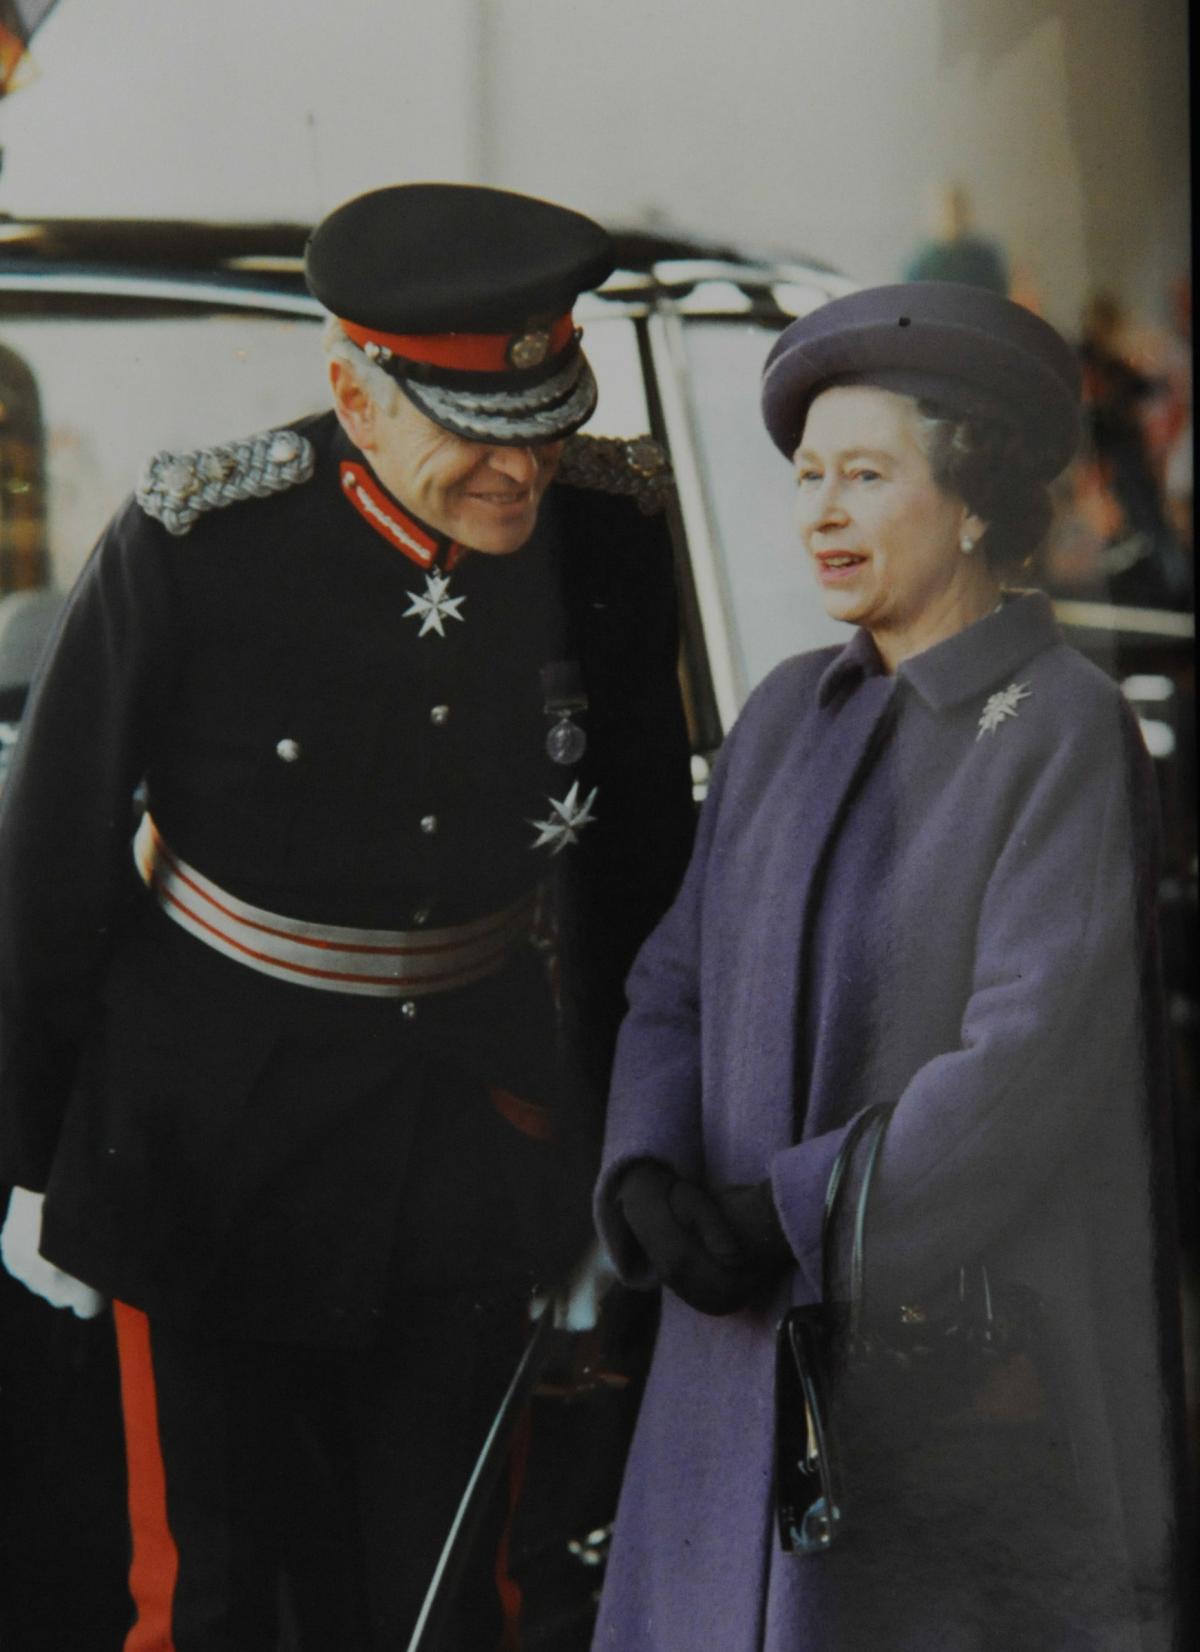 Chatting to Lord Lieutenant Sir Thomas Dunne in 1987